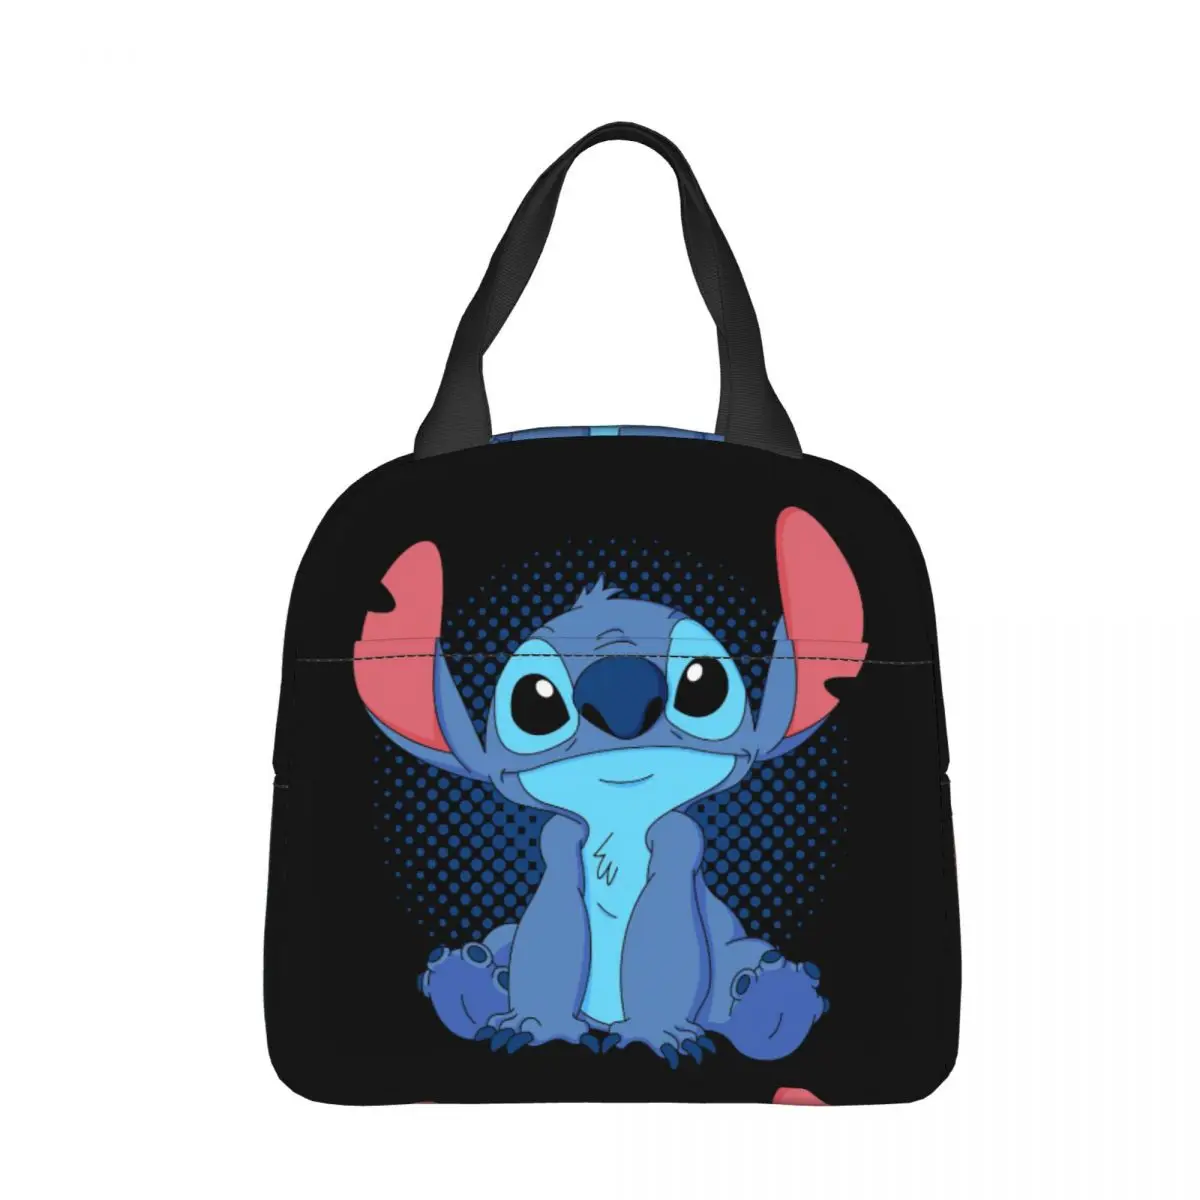 https://ae01.alicdn.com/kf/S5756c5fcb54749d9a4403e069f760e03H/Disney-Stitch-And-Lilo-Insulated-Lunch-Bag-Leakproof-Stitch-Animals-Cute-Reusable-Cooler-Bag-Tote-Lunch.jpg